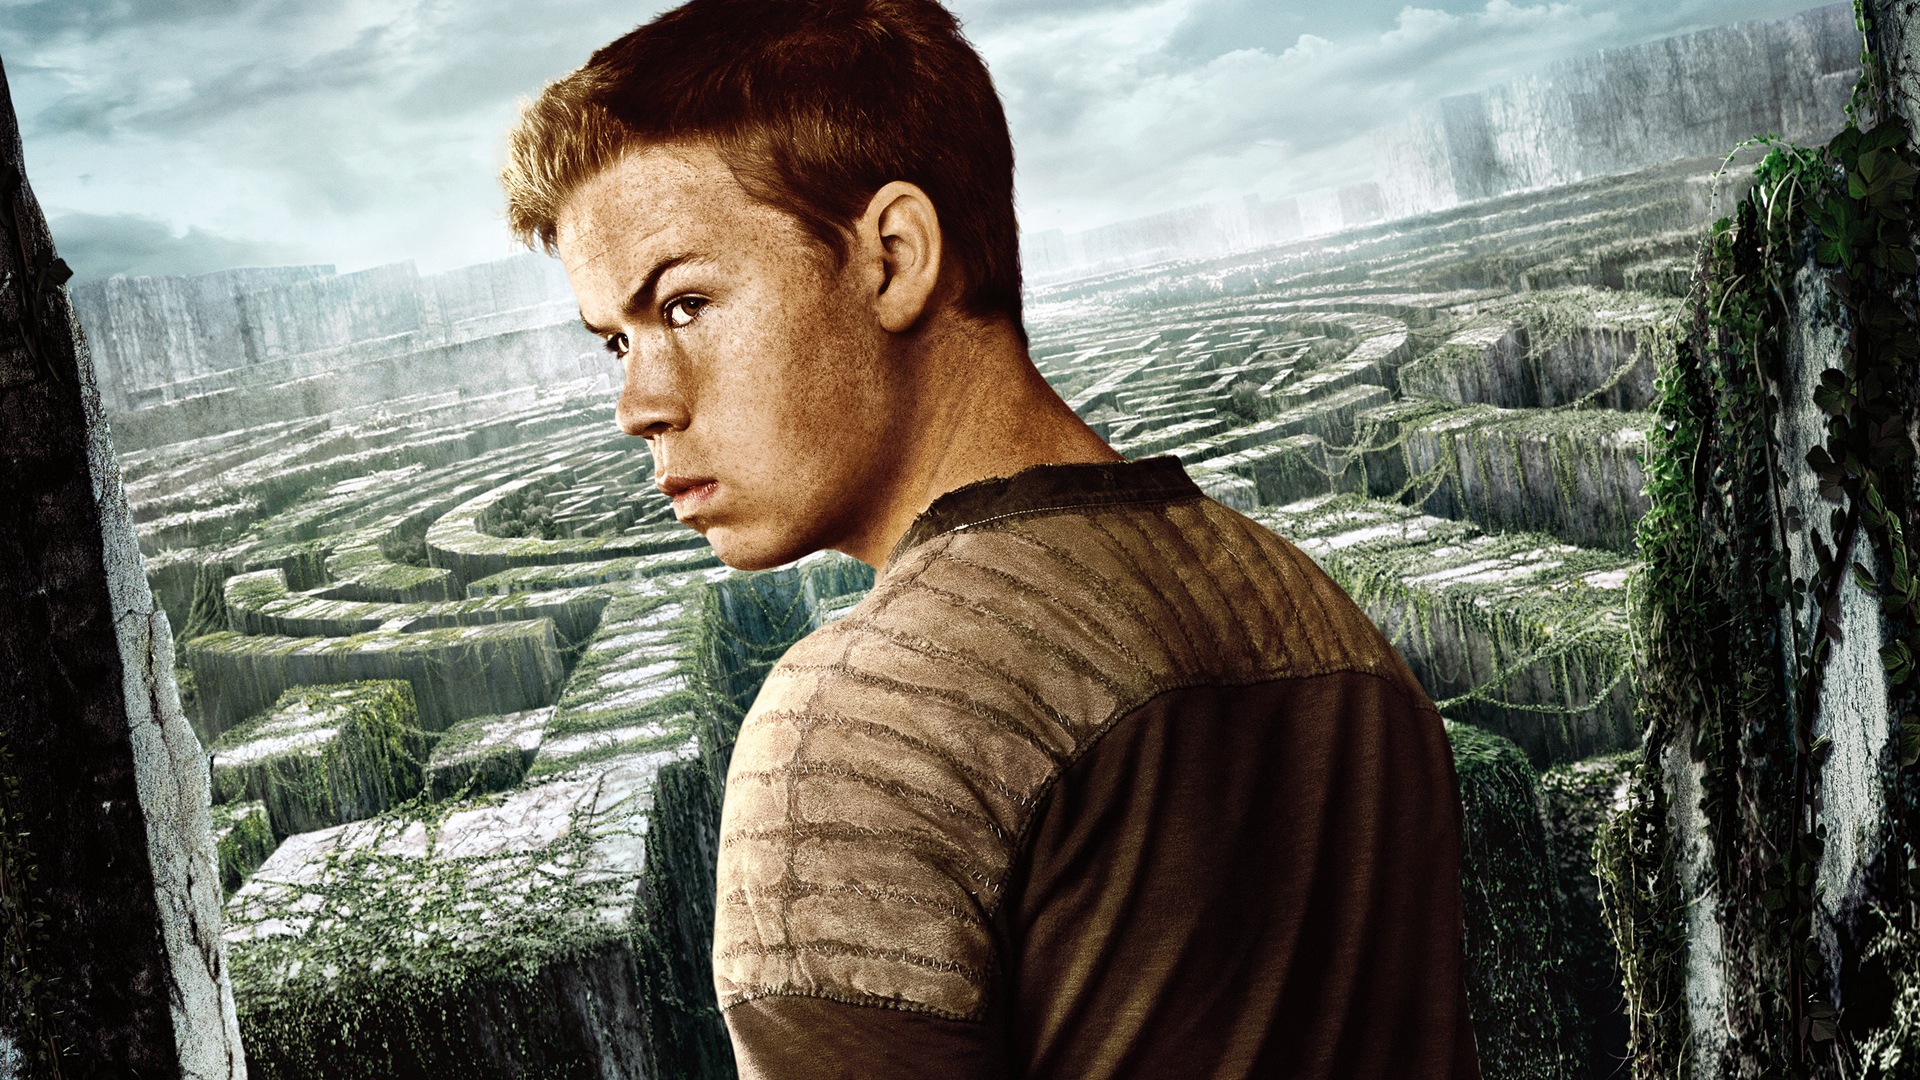 The Maze Runner HD movie wallpapers #11 - 1920x1080